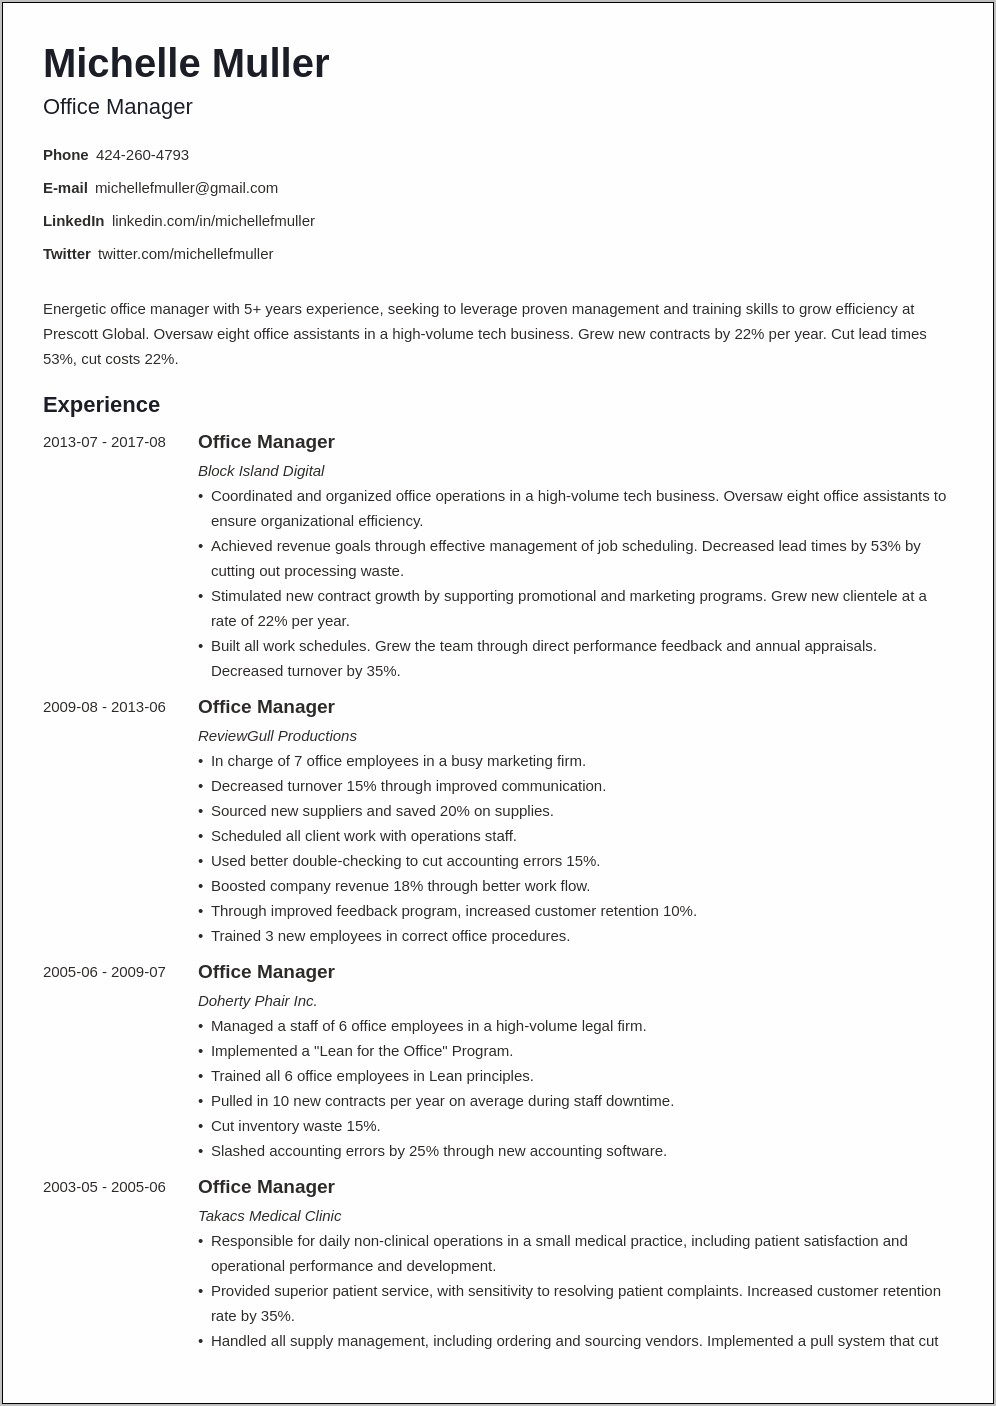 Resume Multiple Jobs Within Same Company